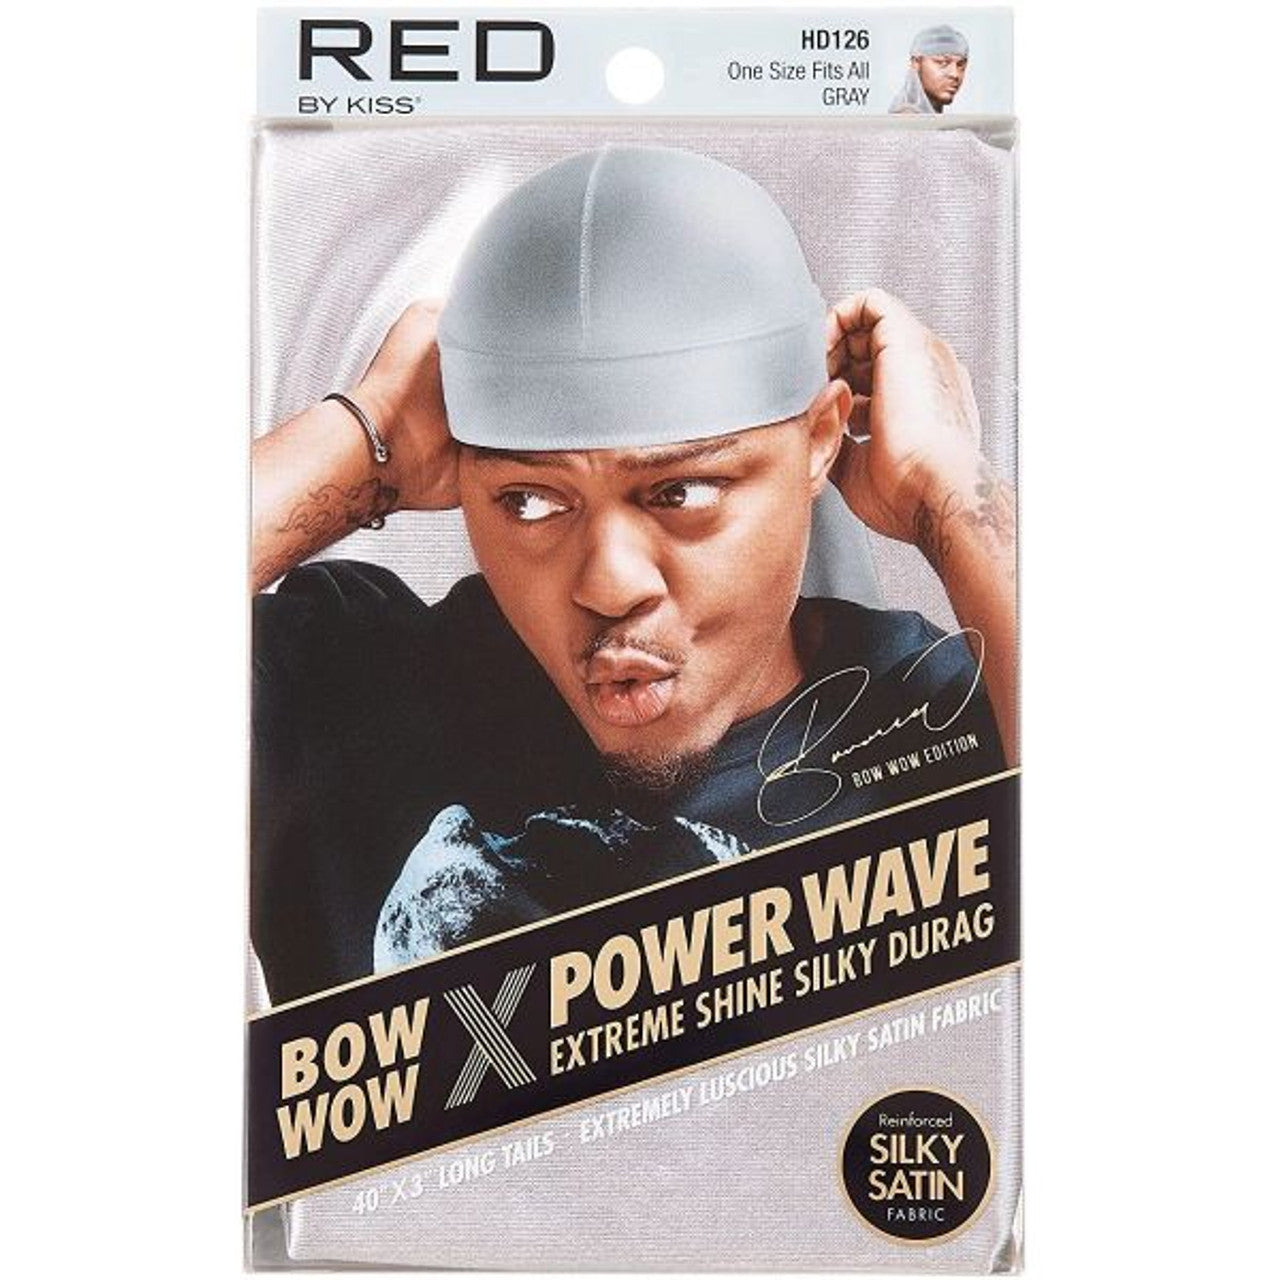 Red by Kiss Bow Wow X Power Wave Extreme Shine Silky Durag - Gray - #HD126